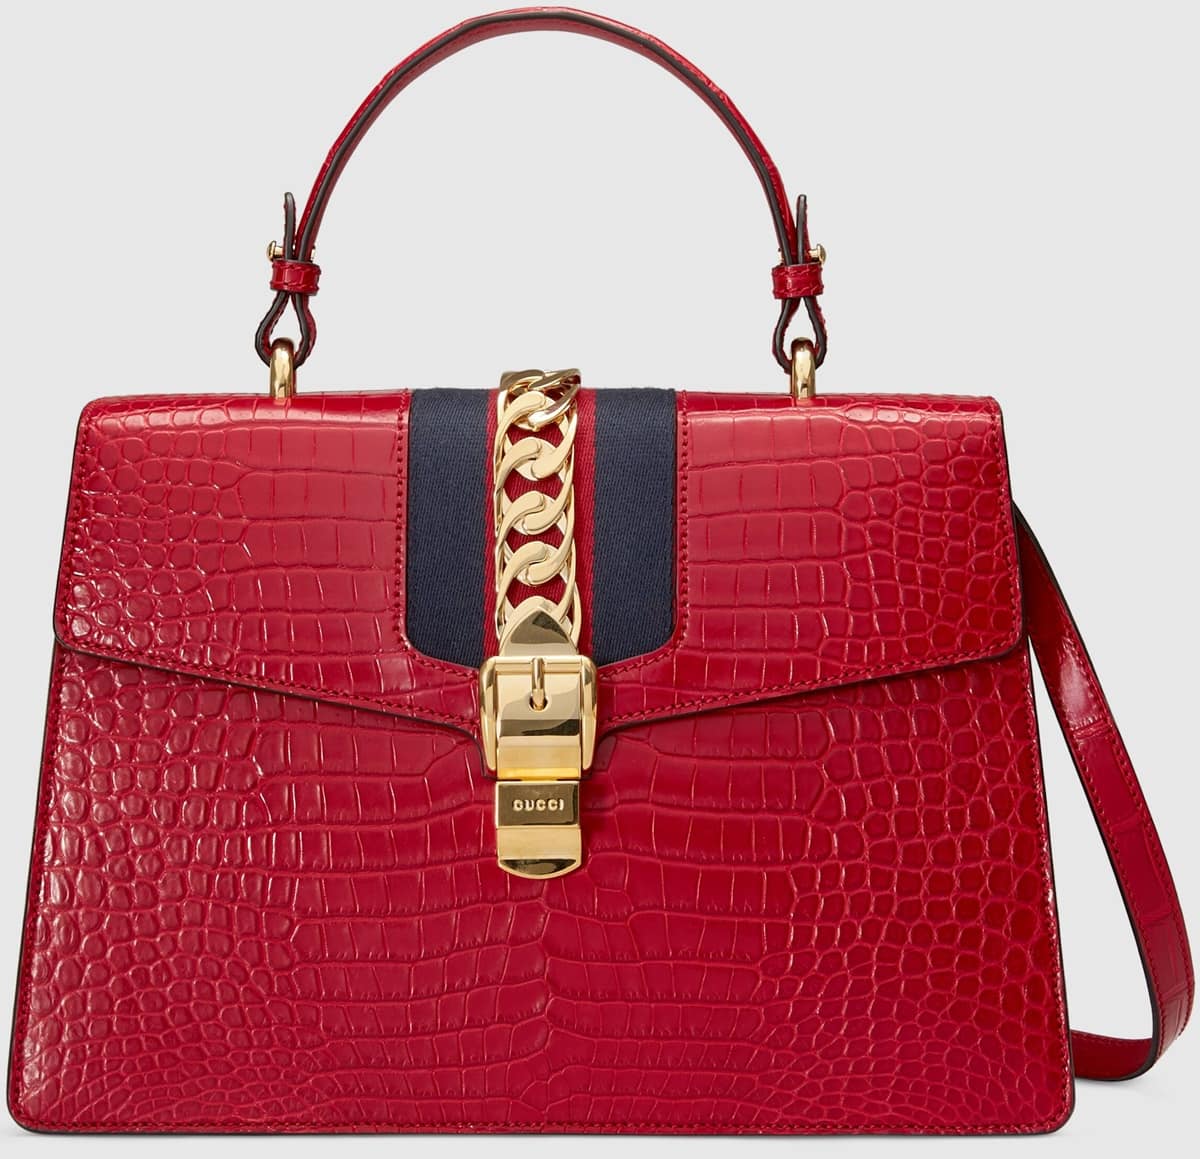 Gucci's Hibiscus red crocodile Sylvie top handle bag decorated with a gold chain and buckle